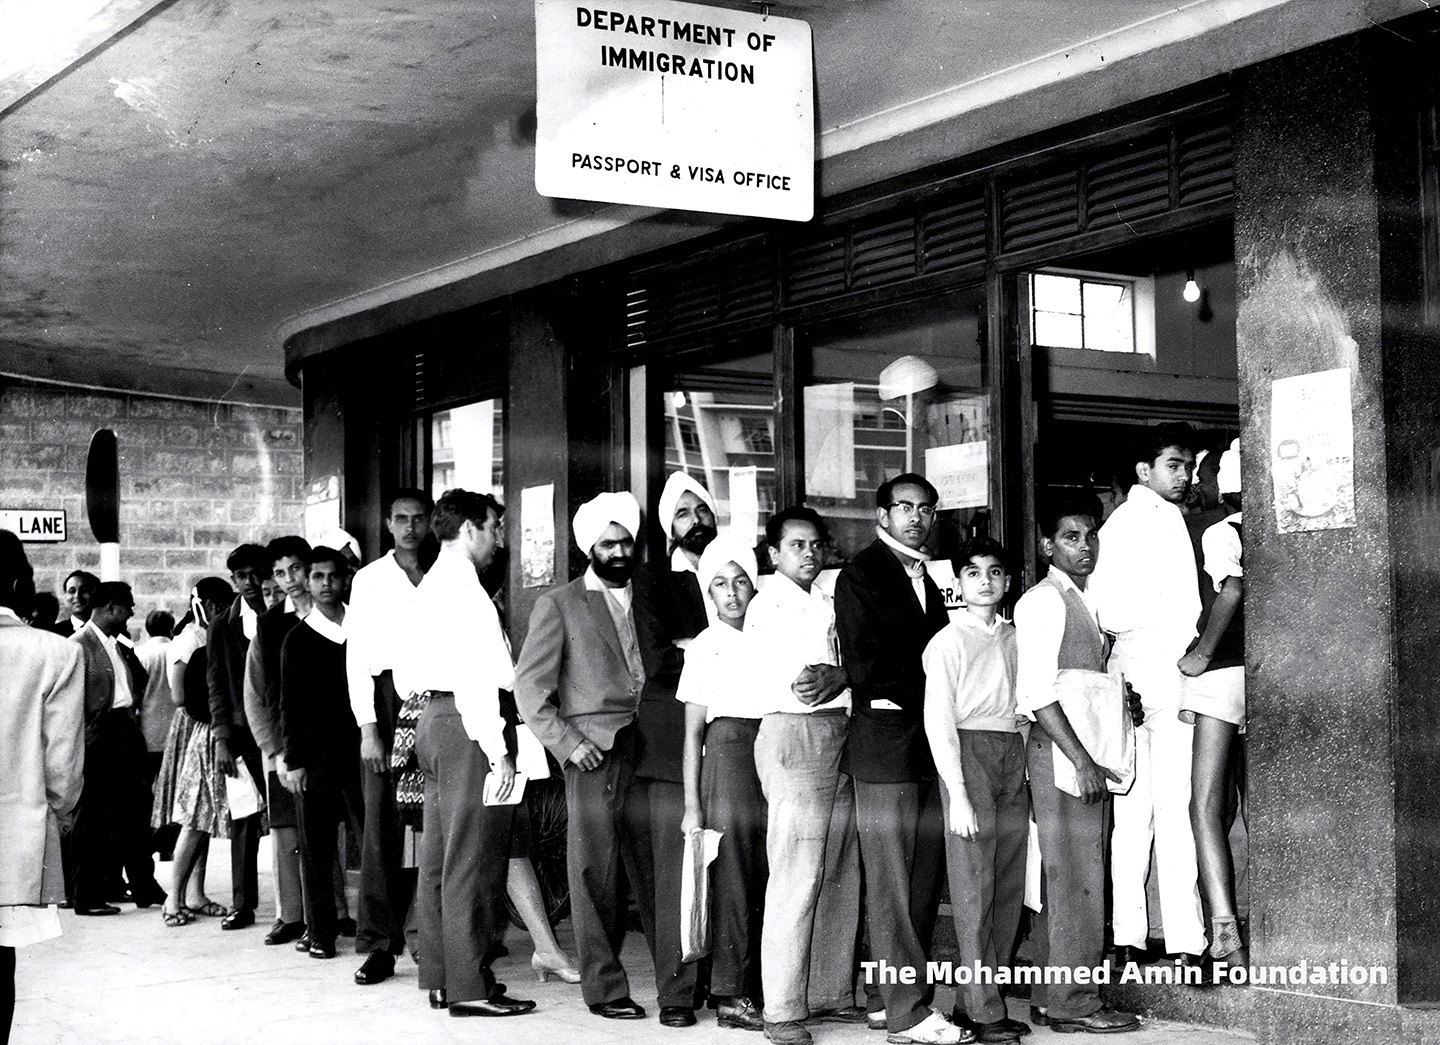 Asians queue up at the Immigration office